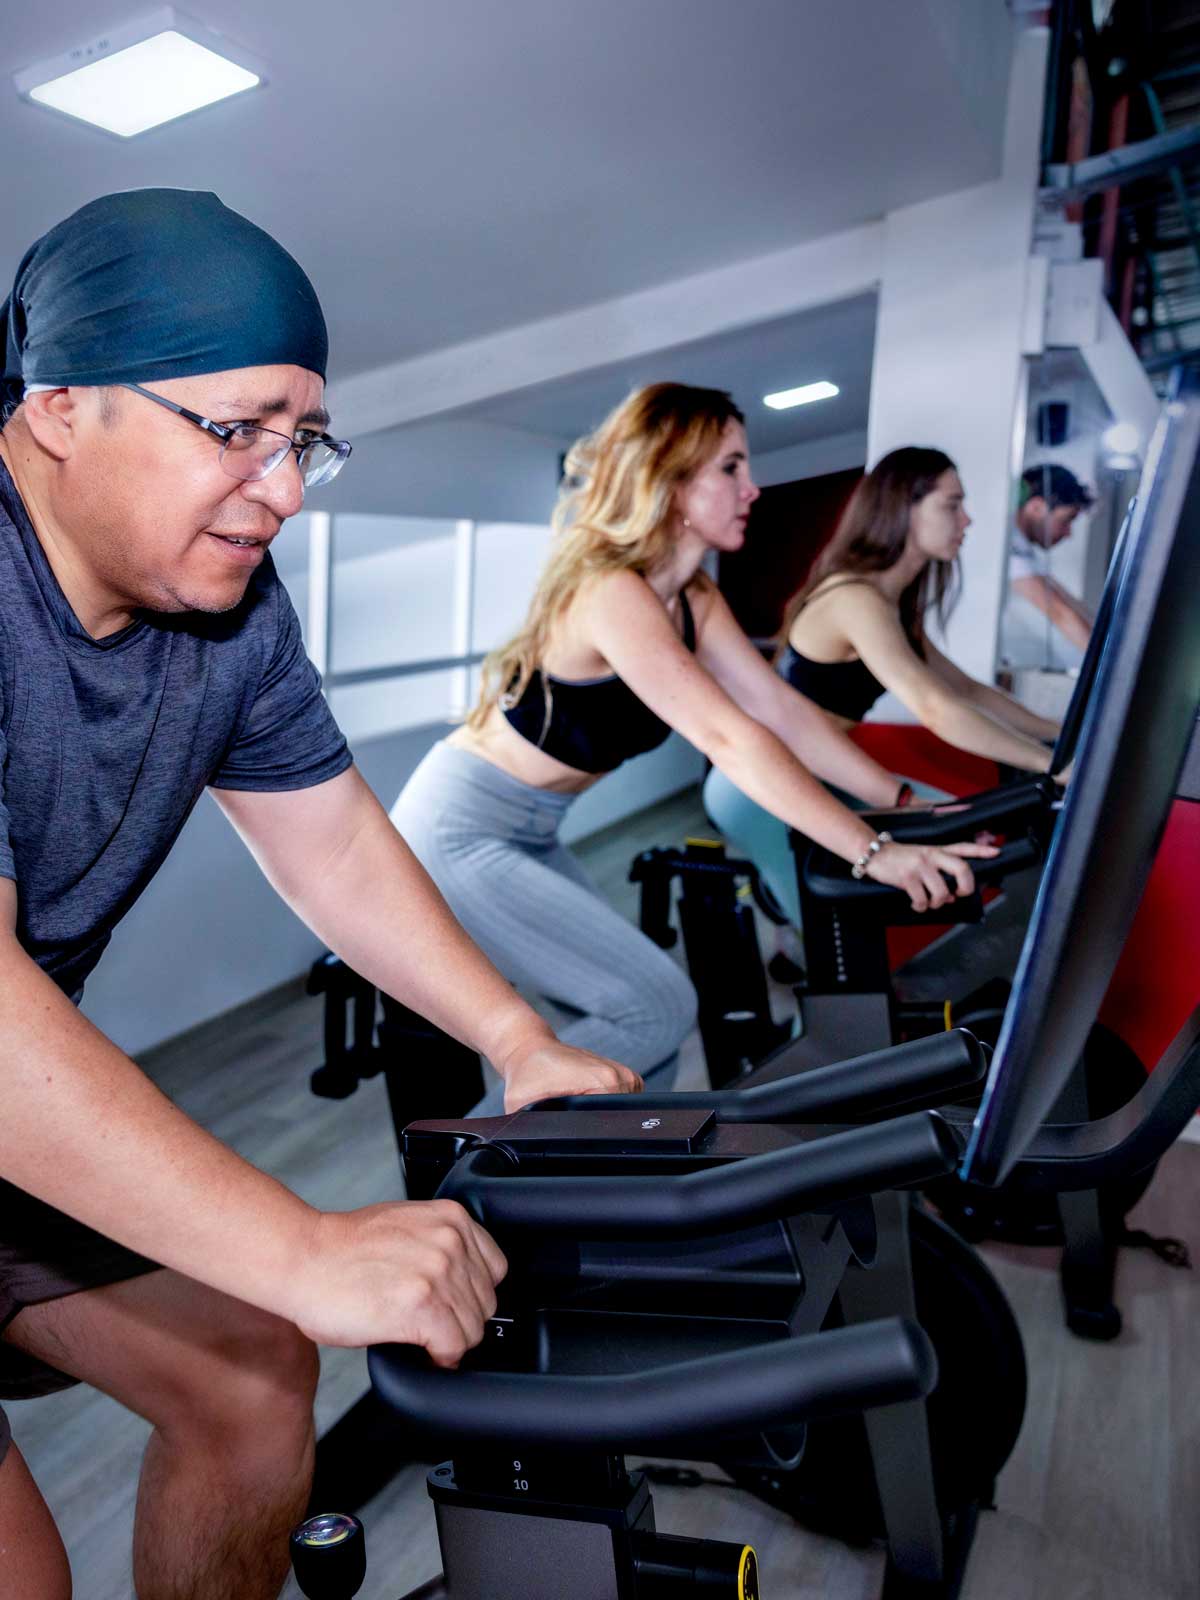 Clases de Spinning virtuales